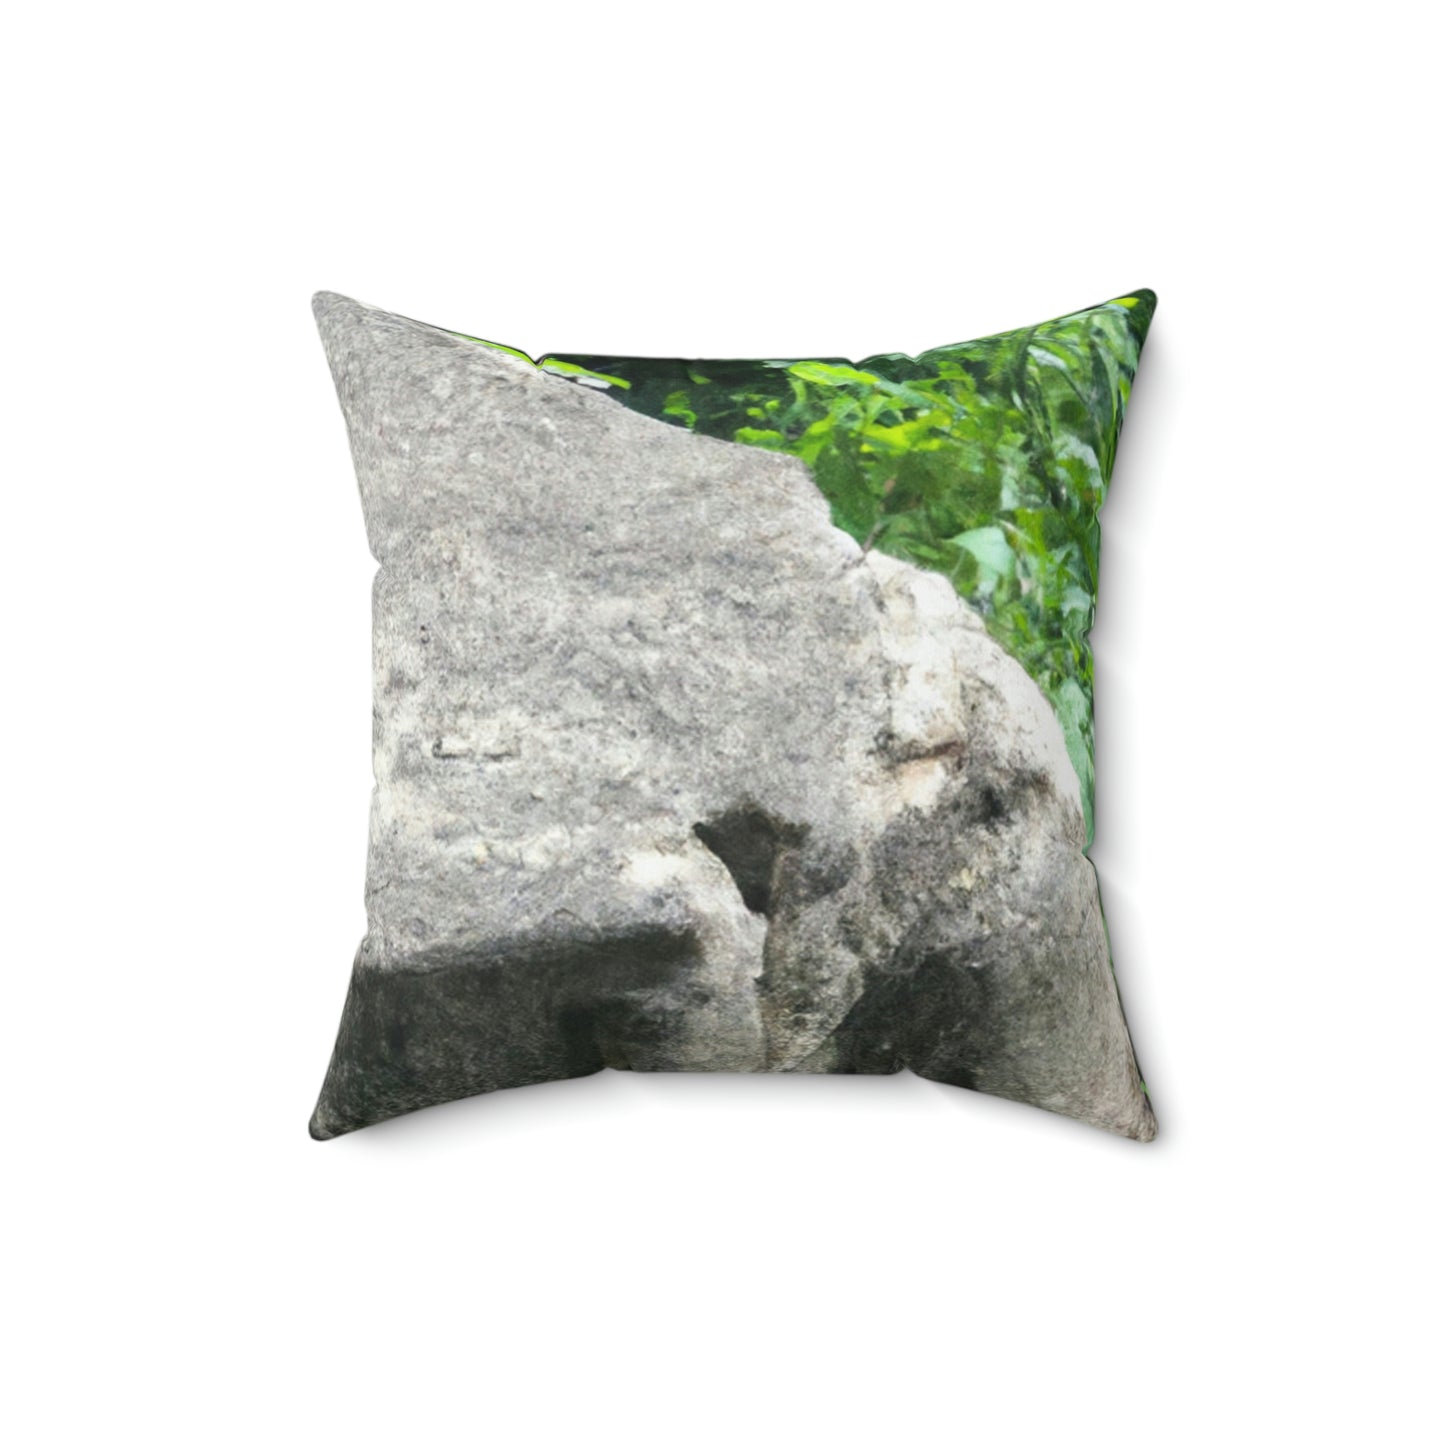 "The Whispering Stone" - The Alien Square Pillow